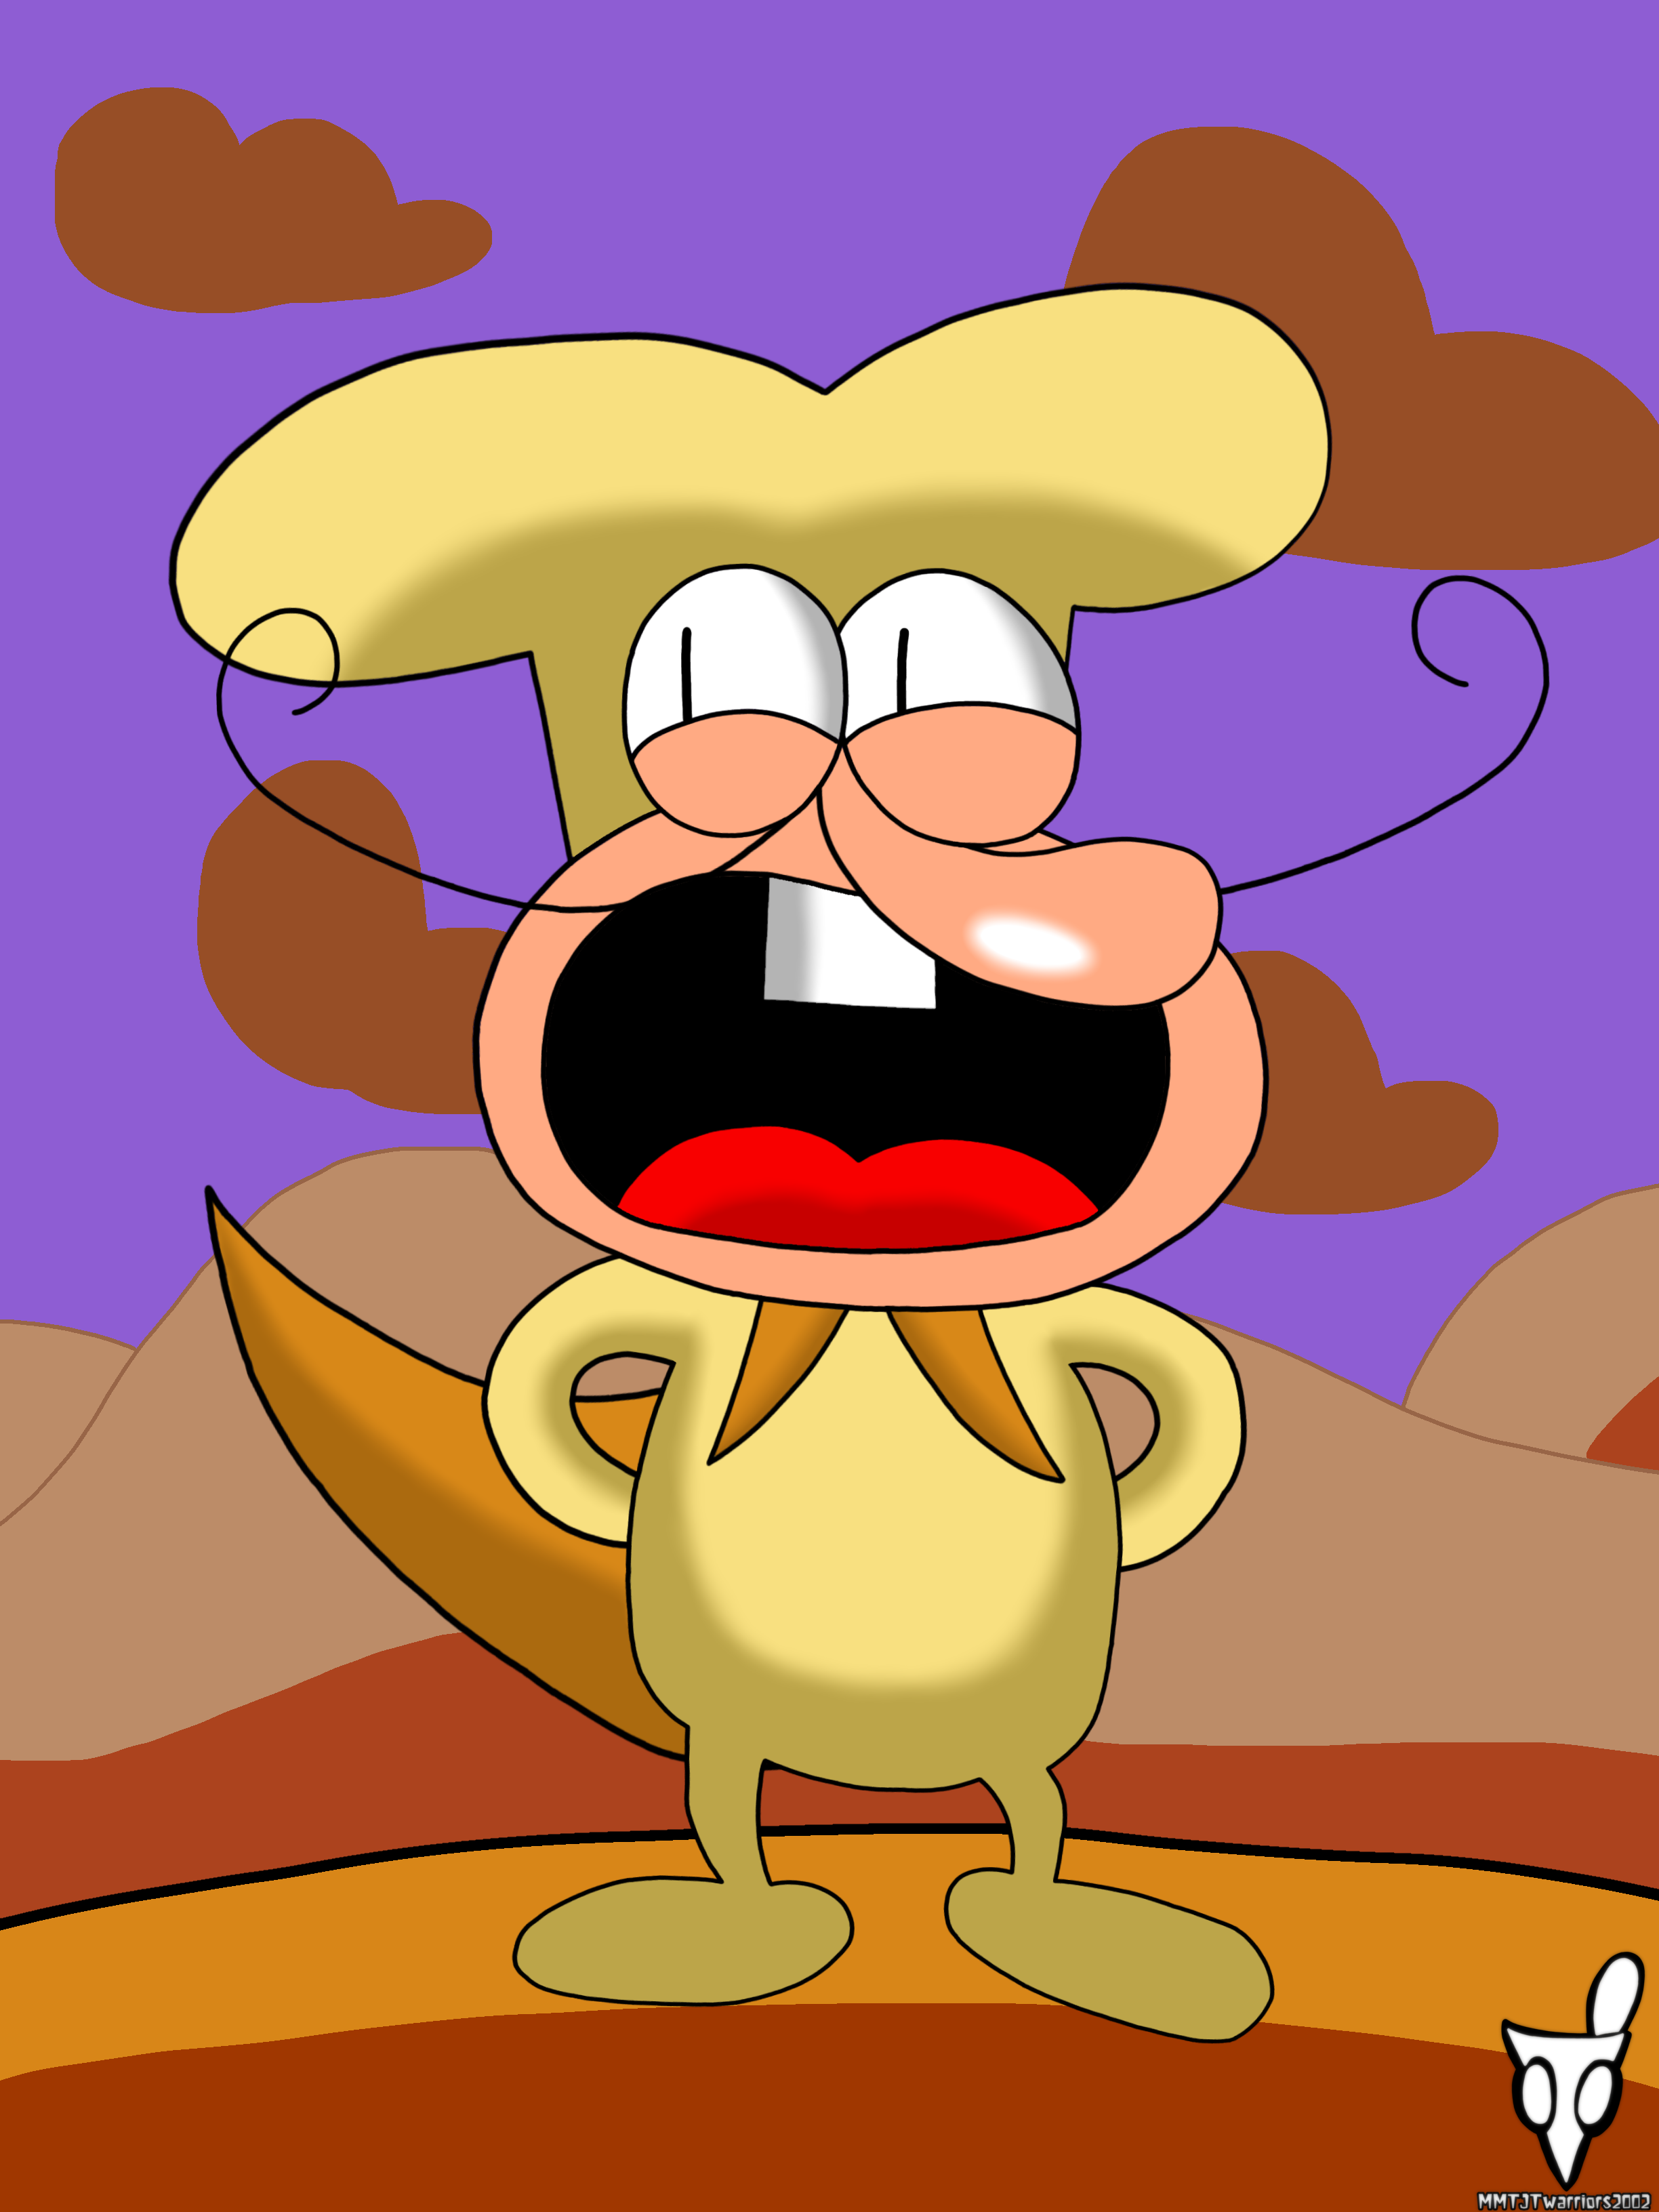 Pizza Tower: Peppino and The Noise by awesomemario1 on DeviantArt